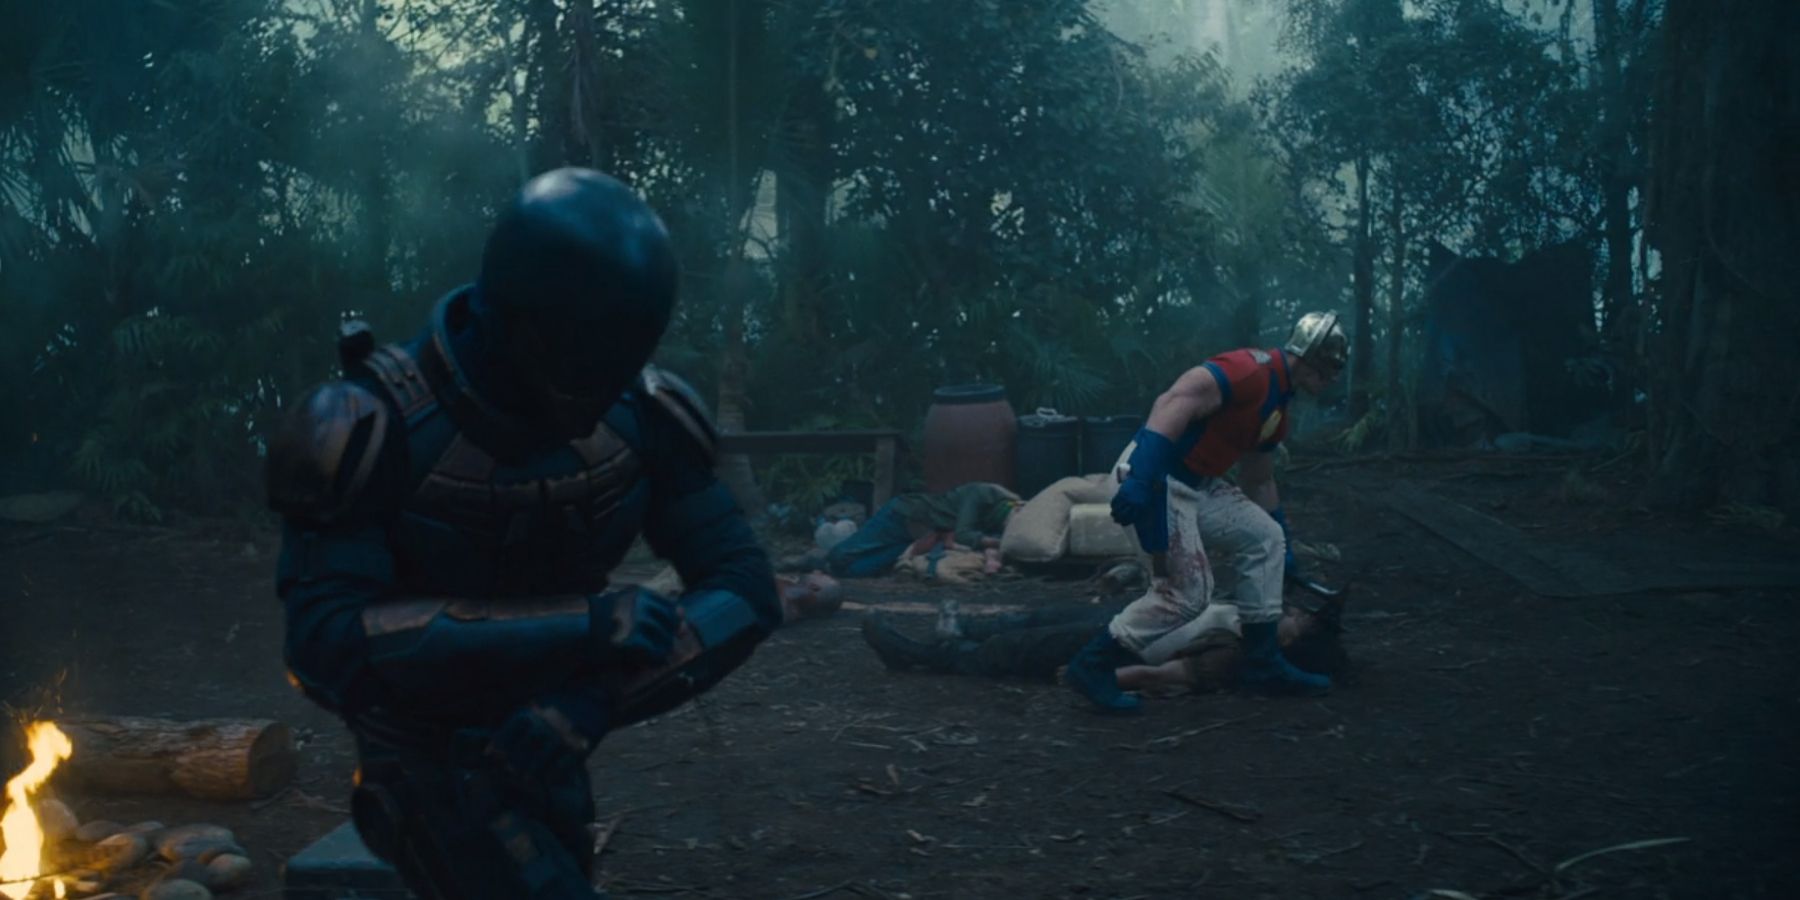 Bloodsport and Peacemaker arming up with garrote wire and a hatchet in James Gunn's The Suicide Squad